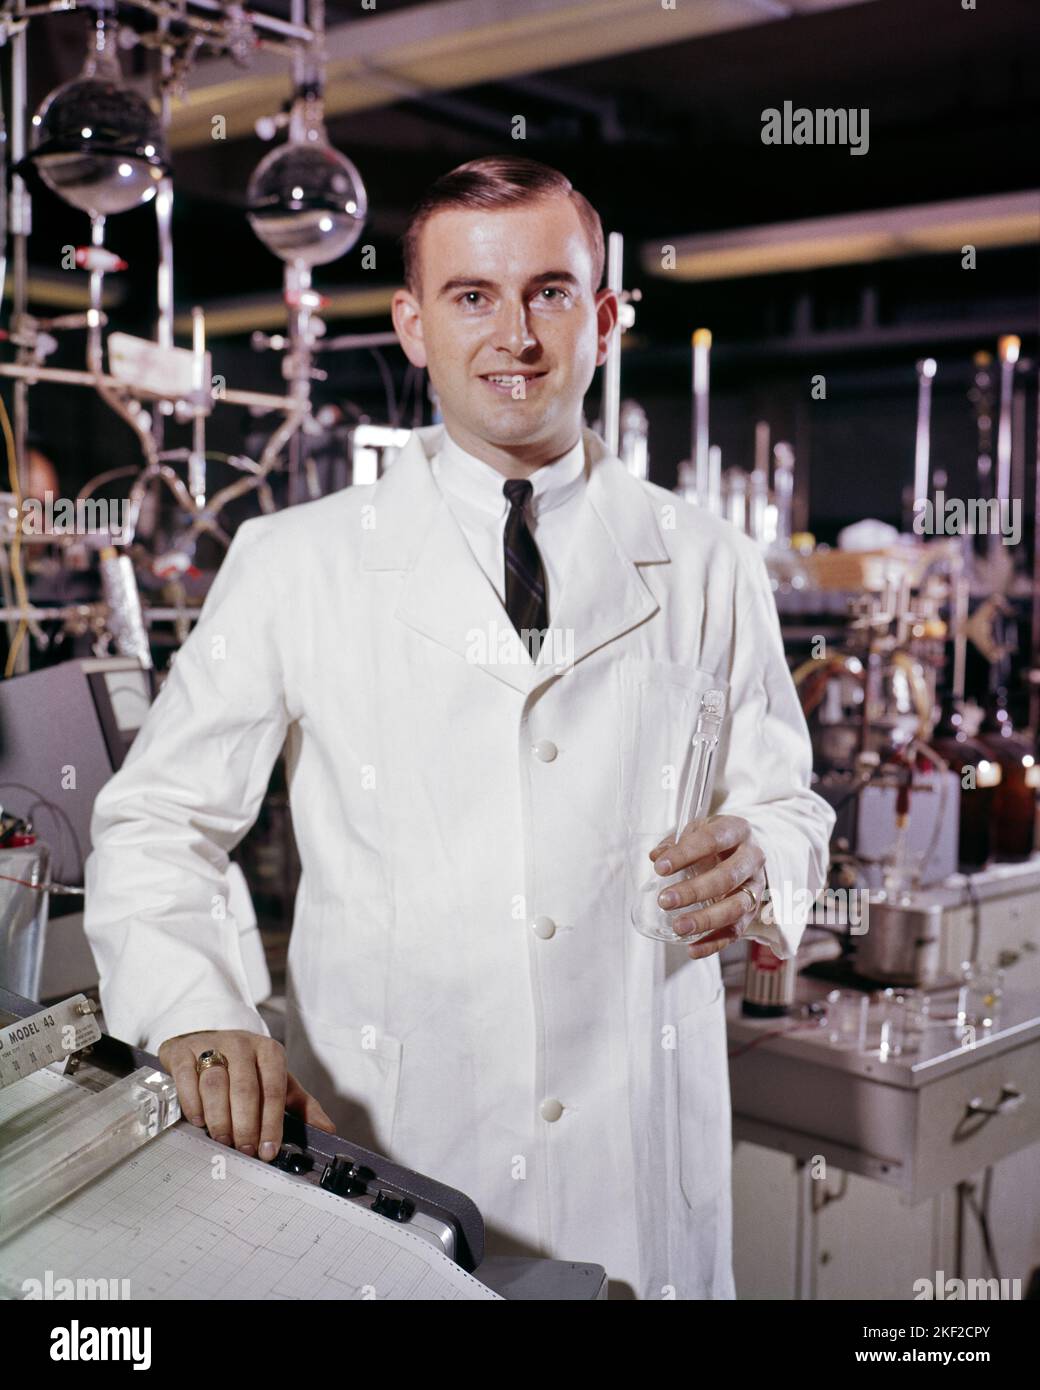 1960s PORTRAIT OF CHEMISTRY TEACHER WITH HANDS ON OSCILLOSCOPE CONTROLS HOLDING GLASSWARE CHEMIST SCIENTIST LOOKING AT CAMERA - kl2306 HAR001 HARS LIFESTYLE LABORATORY COPY SPACE HALF-LENGTH PERSONS BIOLOGY MALES PROFESSION OSCILLOSCOPE EYE CONTACT PROFESSOR OCCUPATION CHEERFUL DISCOVERY UNIVERSITIES CHEMIST SCIENTIFIC CAREERS EXCITEMENT INSTRUCTOR KNOWLEDGE PROGRESS INNOVATION OPPORTUNITY AUTHORITY CONDUCTING OCCUPATIONS SMILES CALCULATION HIGH TECH HIGHER EDUCATION TITRATION GLASSWARE CONTROLS EDUCATOR JOYFUL COLLEGES EDUCATING EDUCATORS IDEAS INSTRUCTORS MID-ADULT MID-ADULT MAN PRECISION Stock Photo